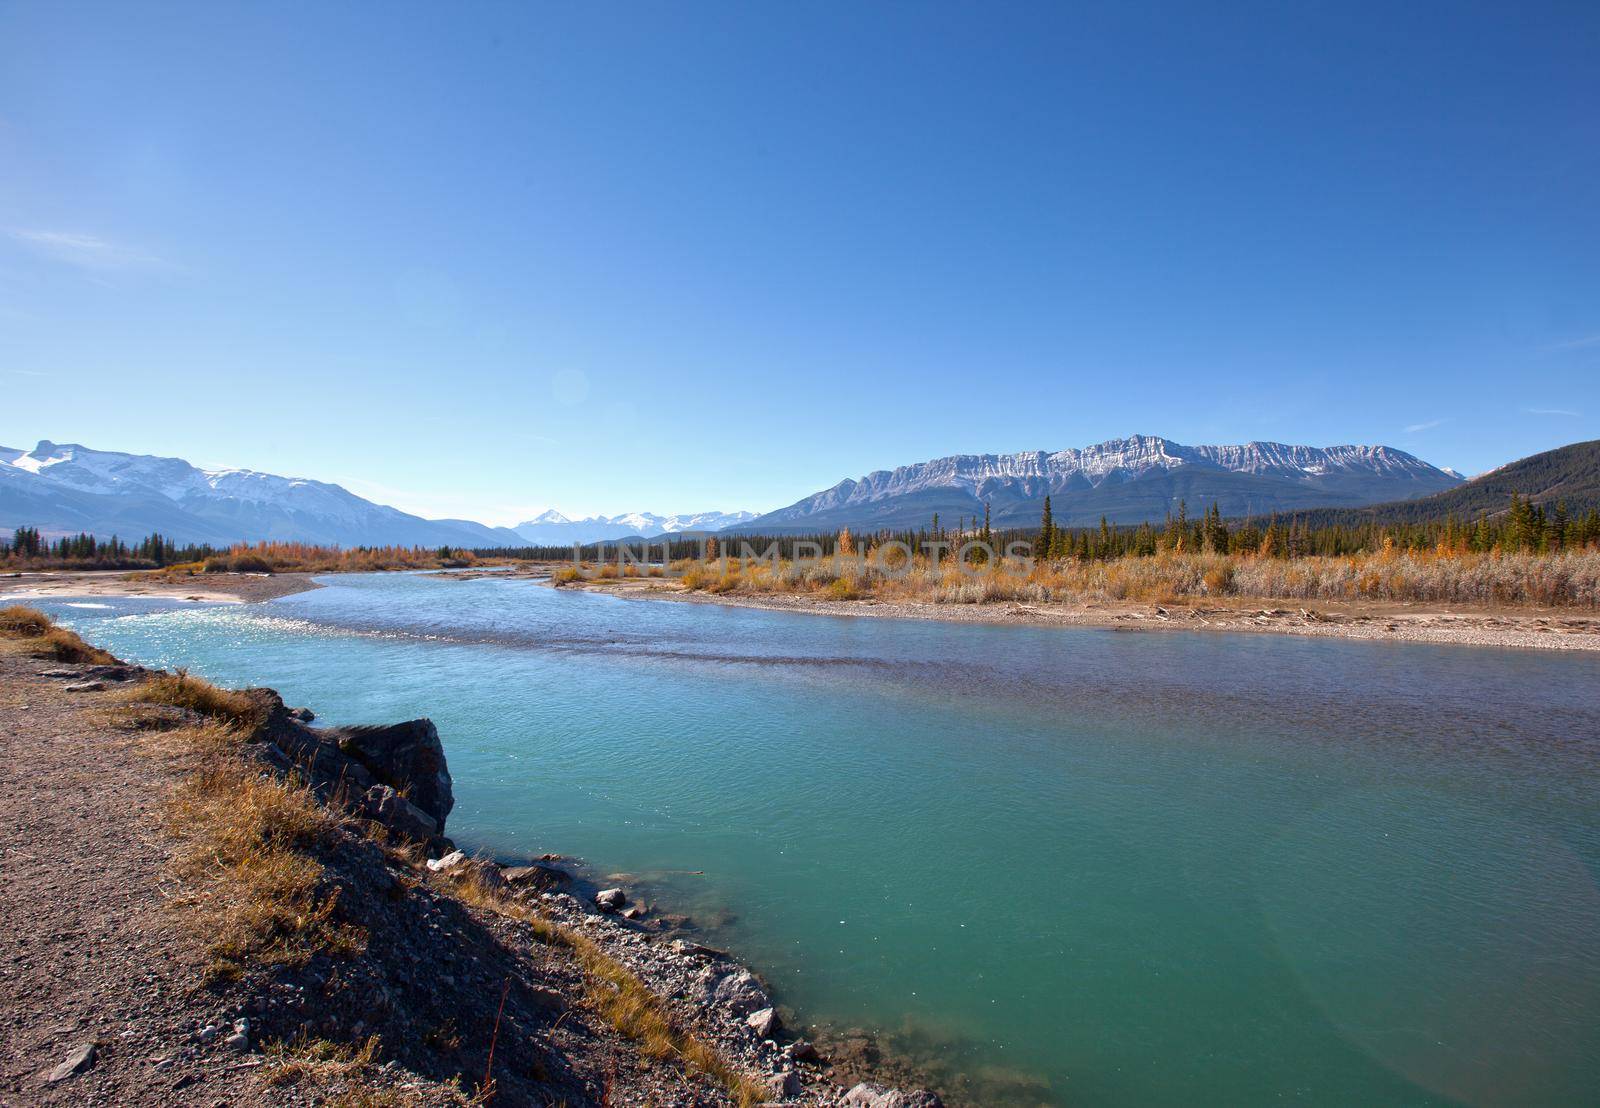  a popular tourist lookoff spot by the Athabasca River in Jasper Park, Alberta with rocky mountain view 